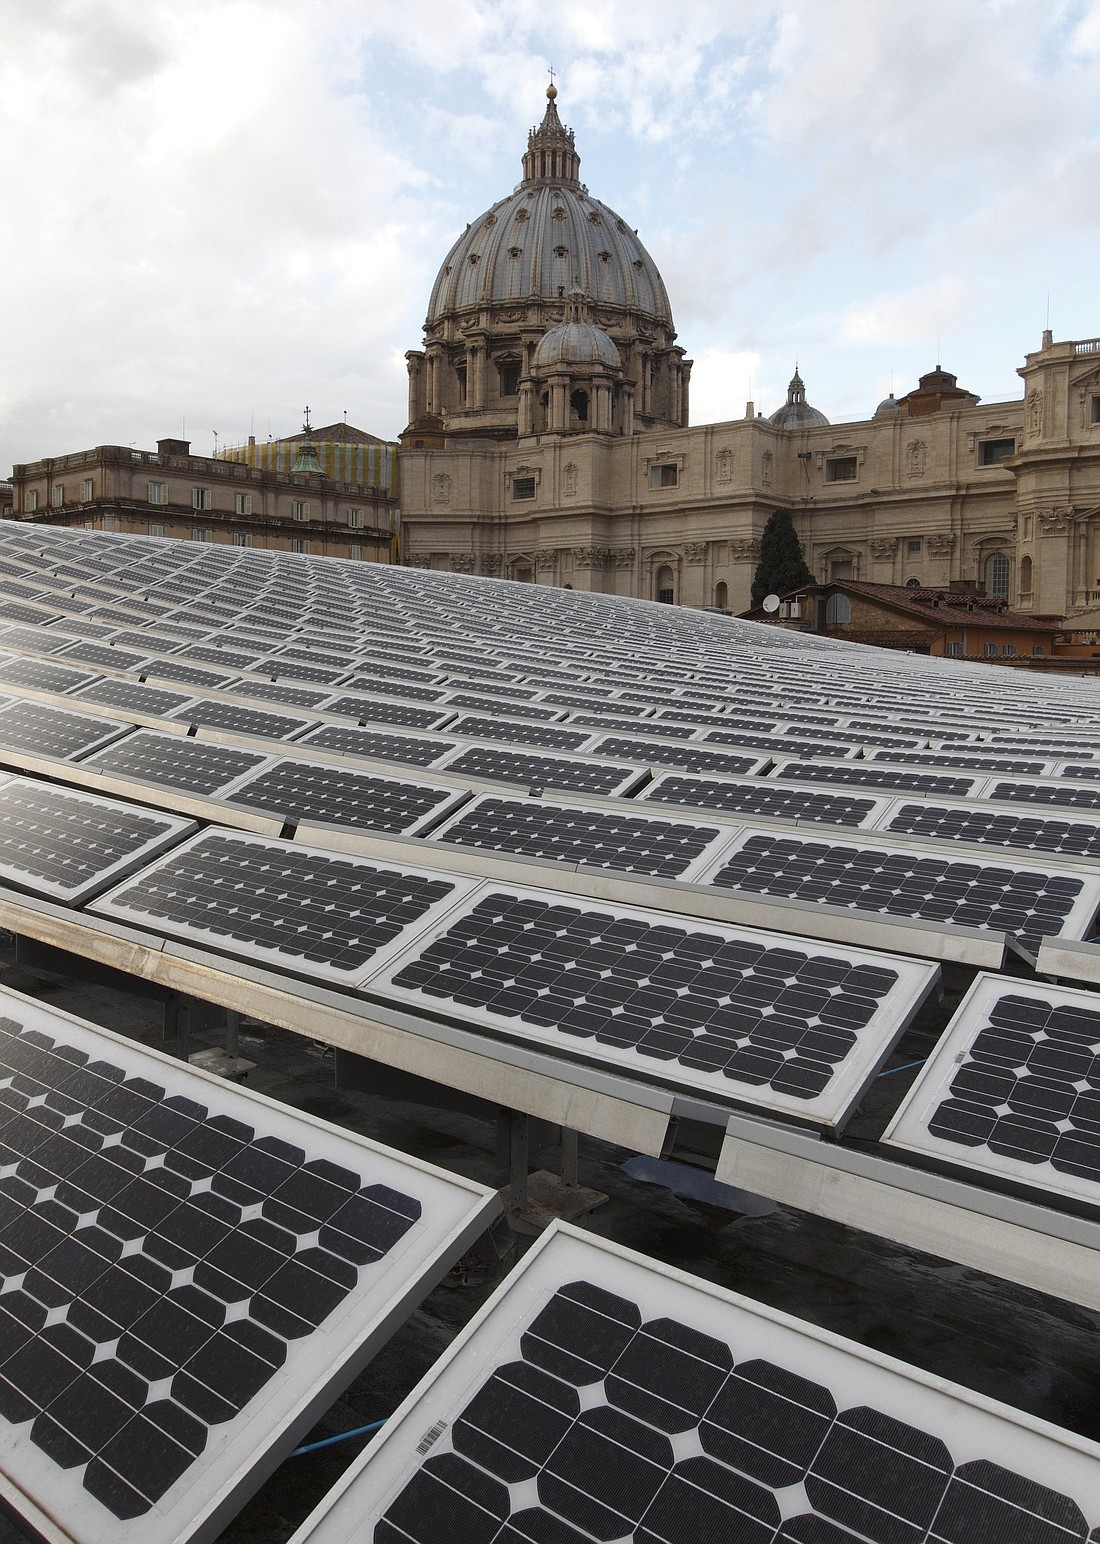 Solar panels are seen on the roof of the Paul VI audience hall at the Vatican in this Dec. 1, 2010, file photo. (CNS photo/Paul Haring)